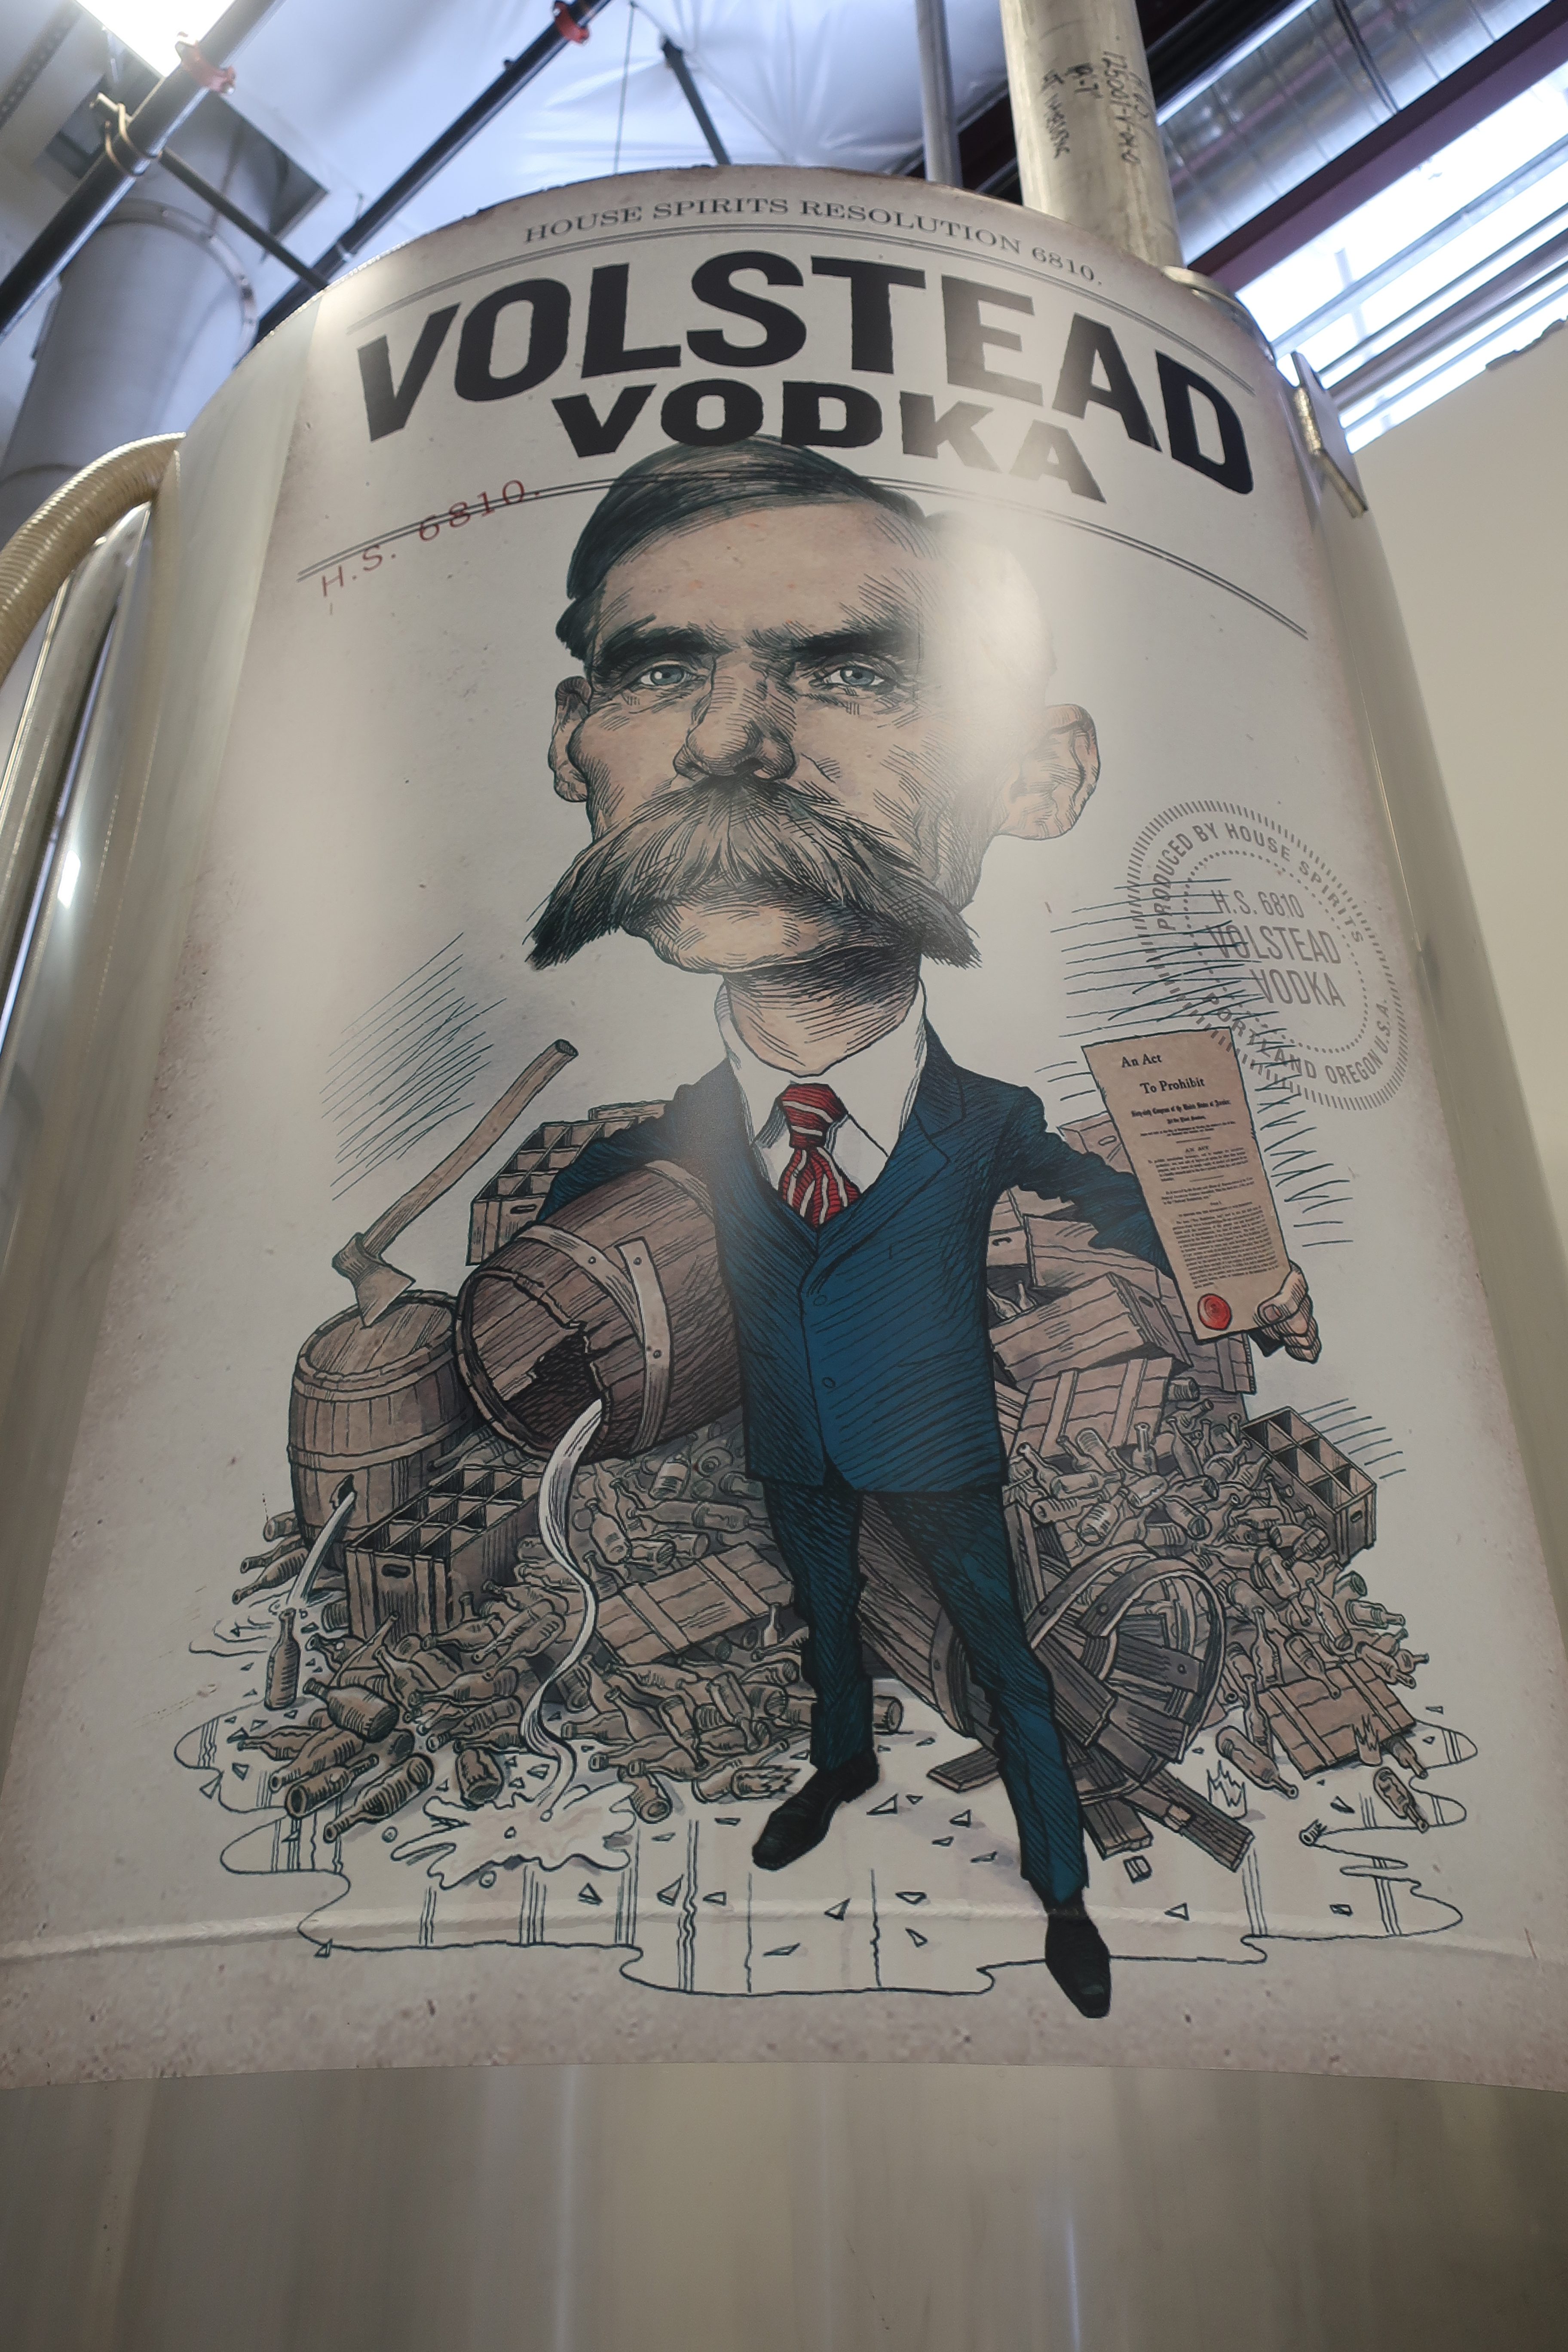 A tank inside House Spirits with the Volstead Vodka label on it.